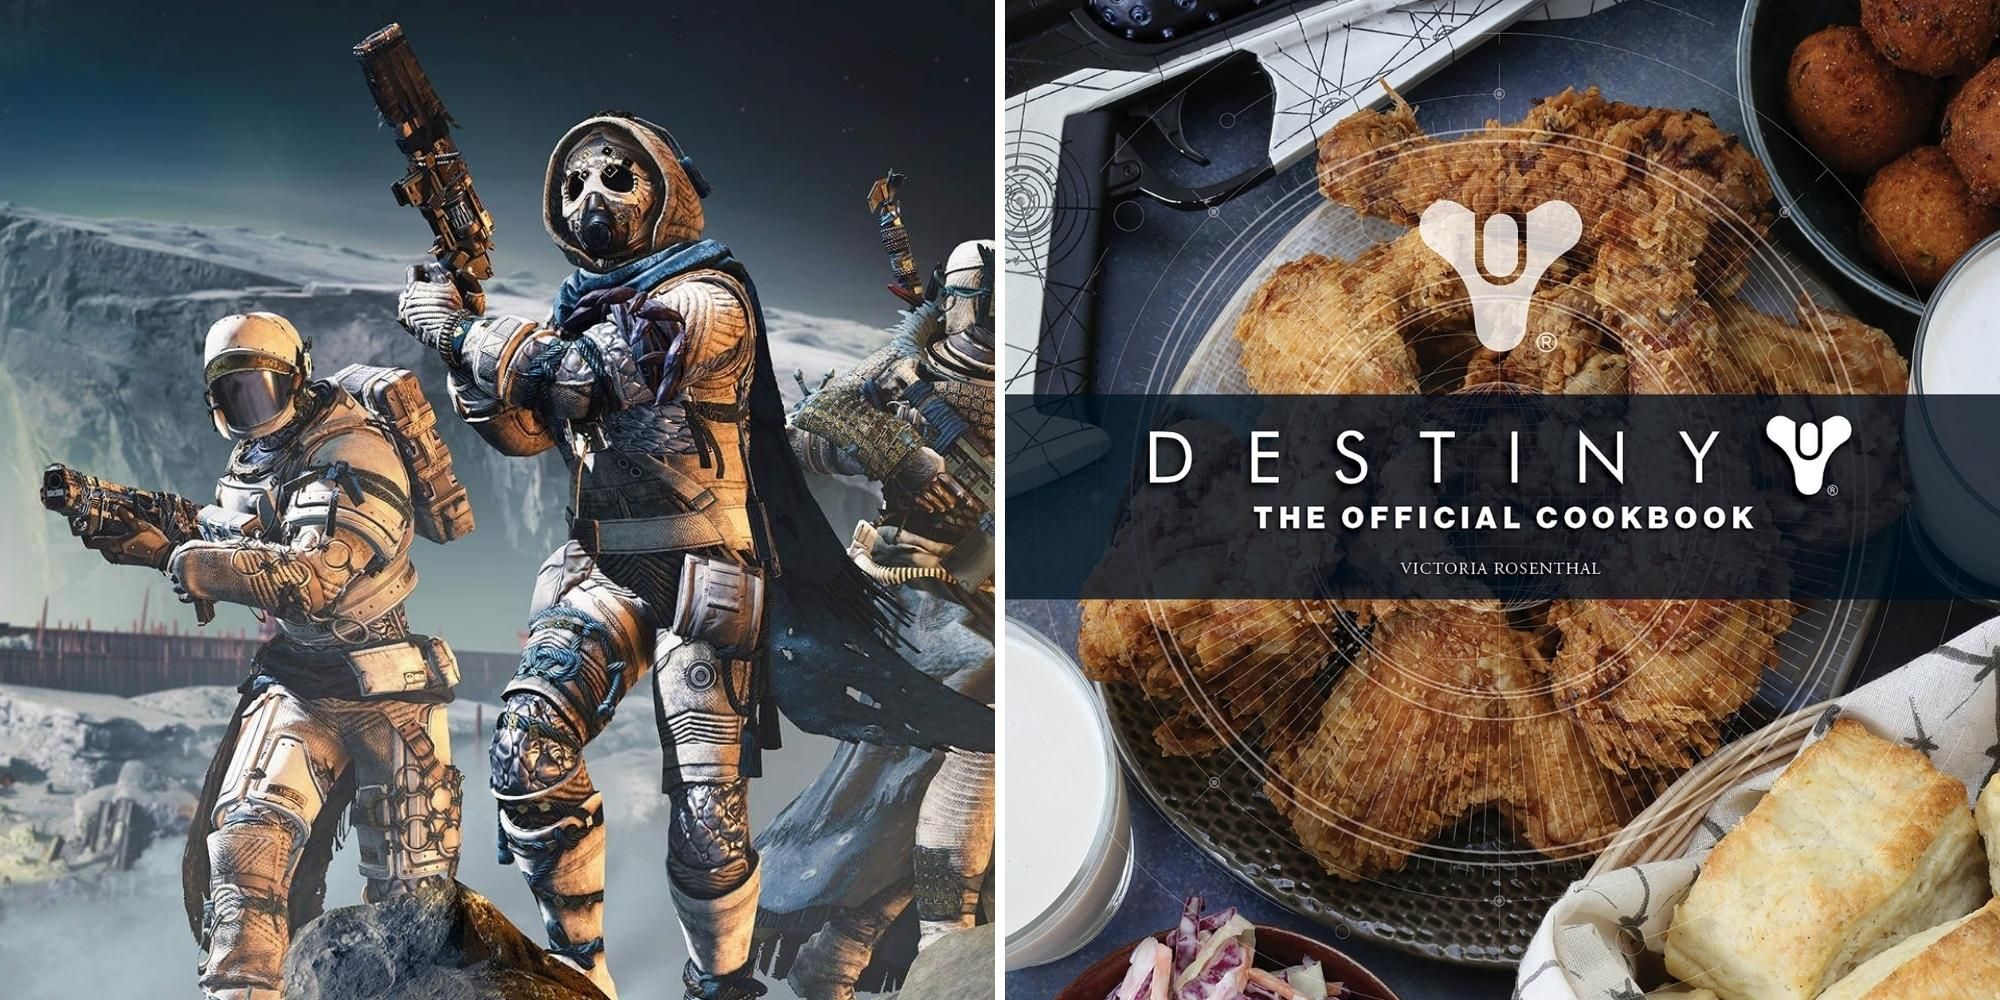 Characters in Destiny and the Destiny Official Cookbook